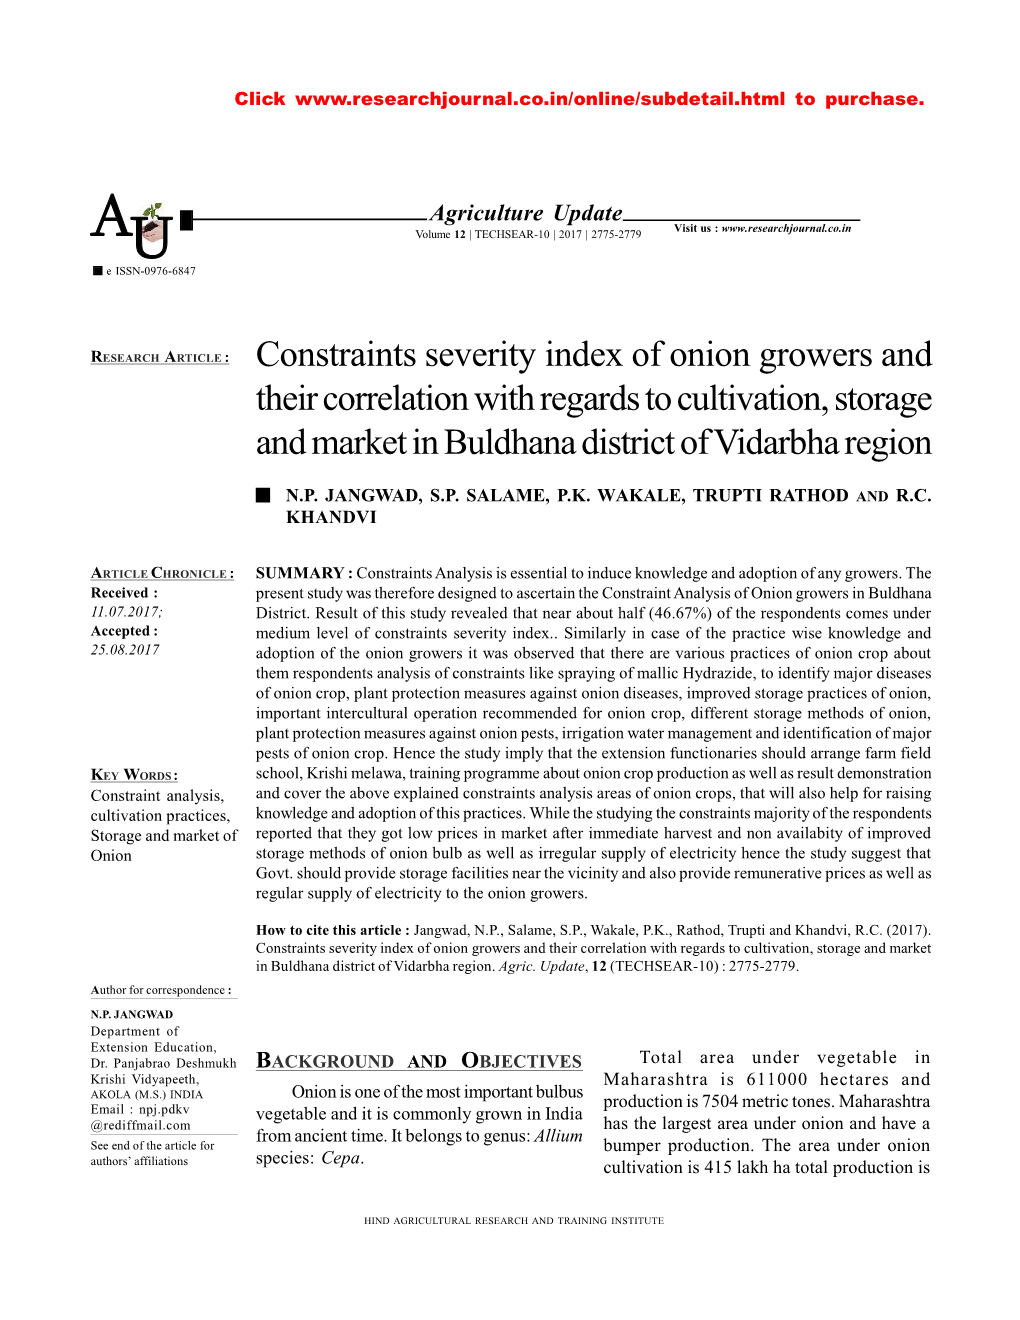 Constraints Severity Index of Onion Growers and Their Correlation with Regards to Cultivation, Storage and Market in Buldhana District of Vidarbha Region